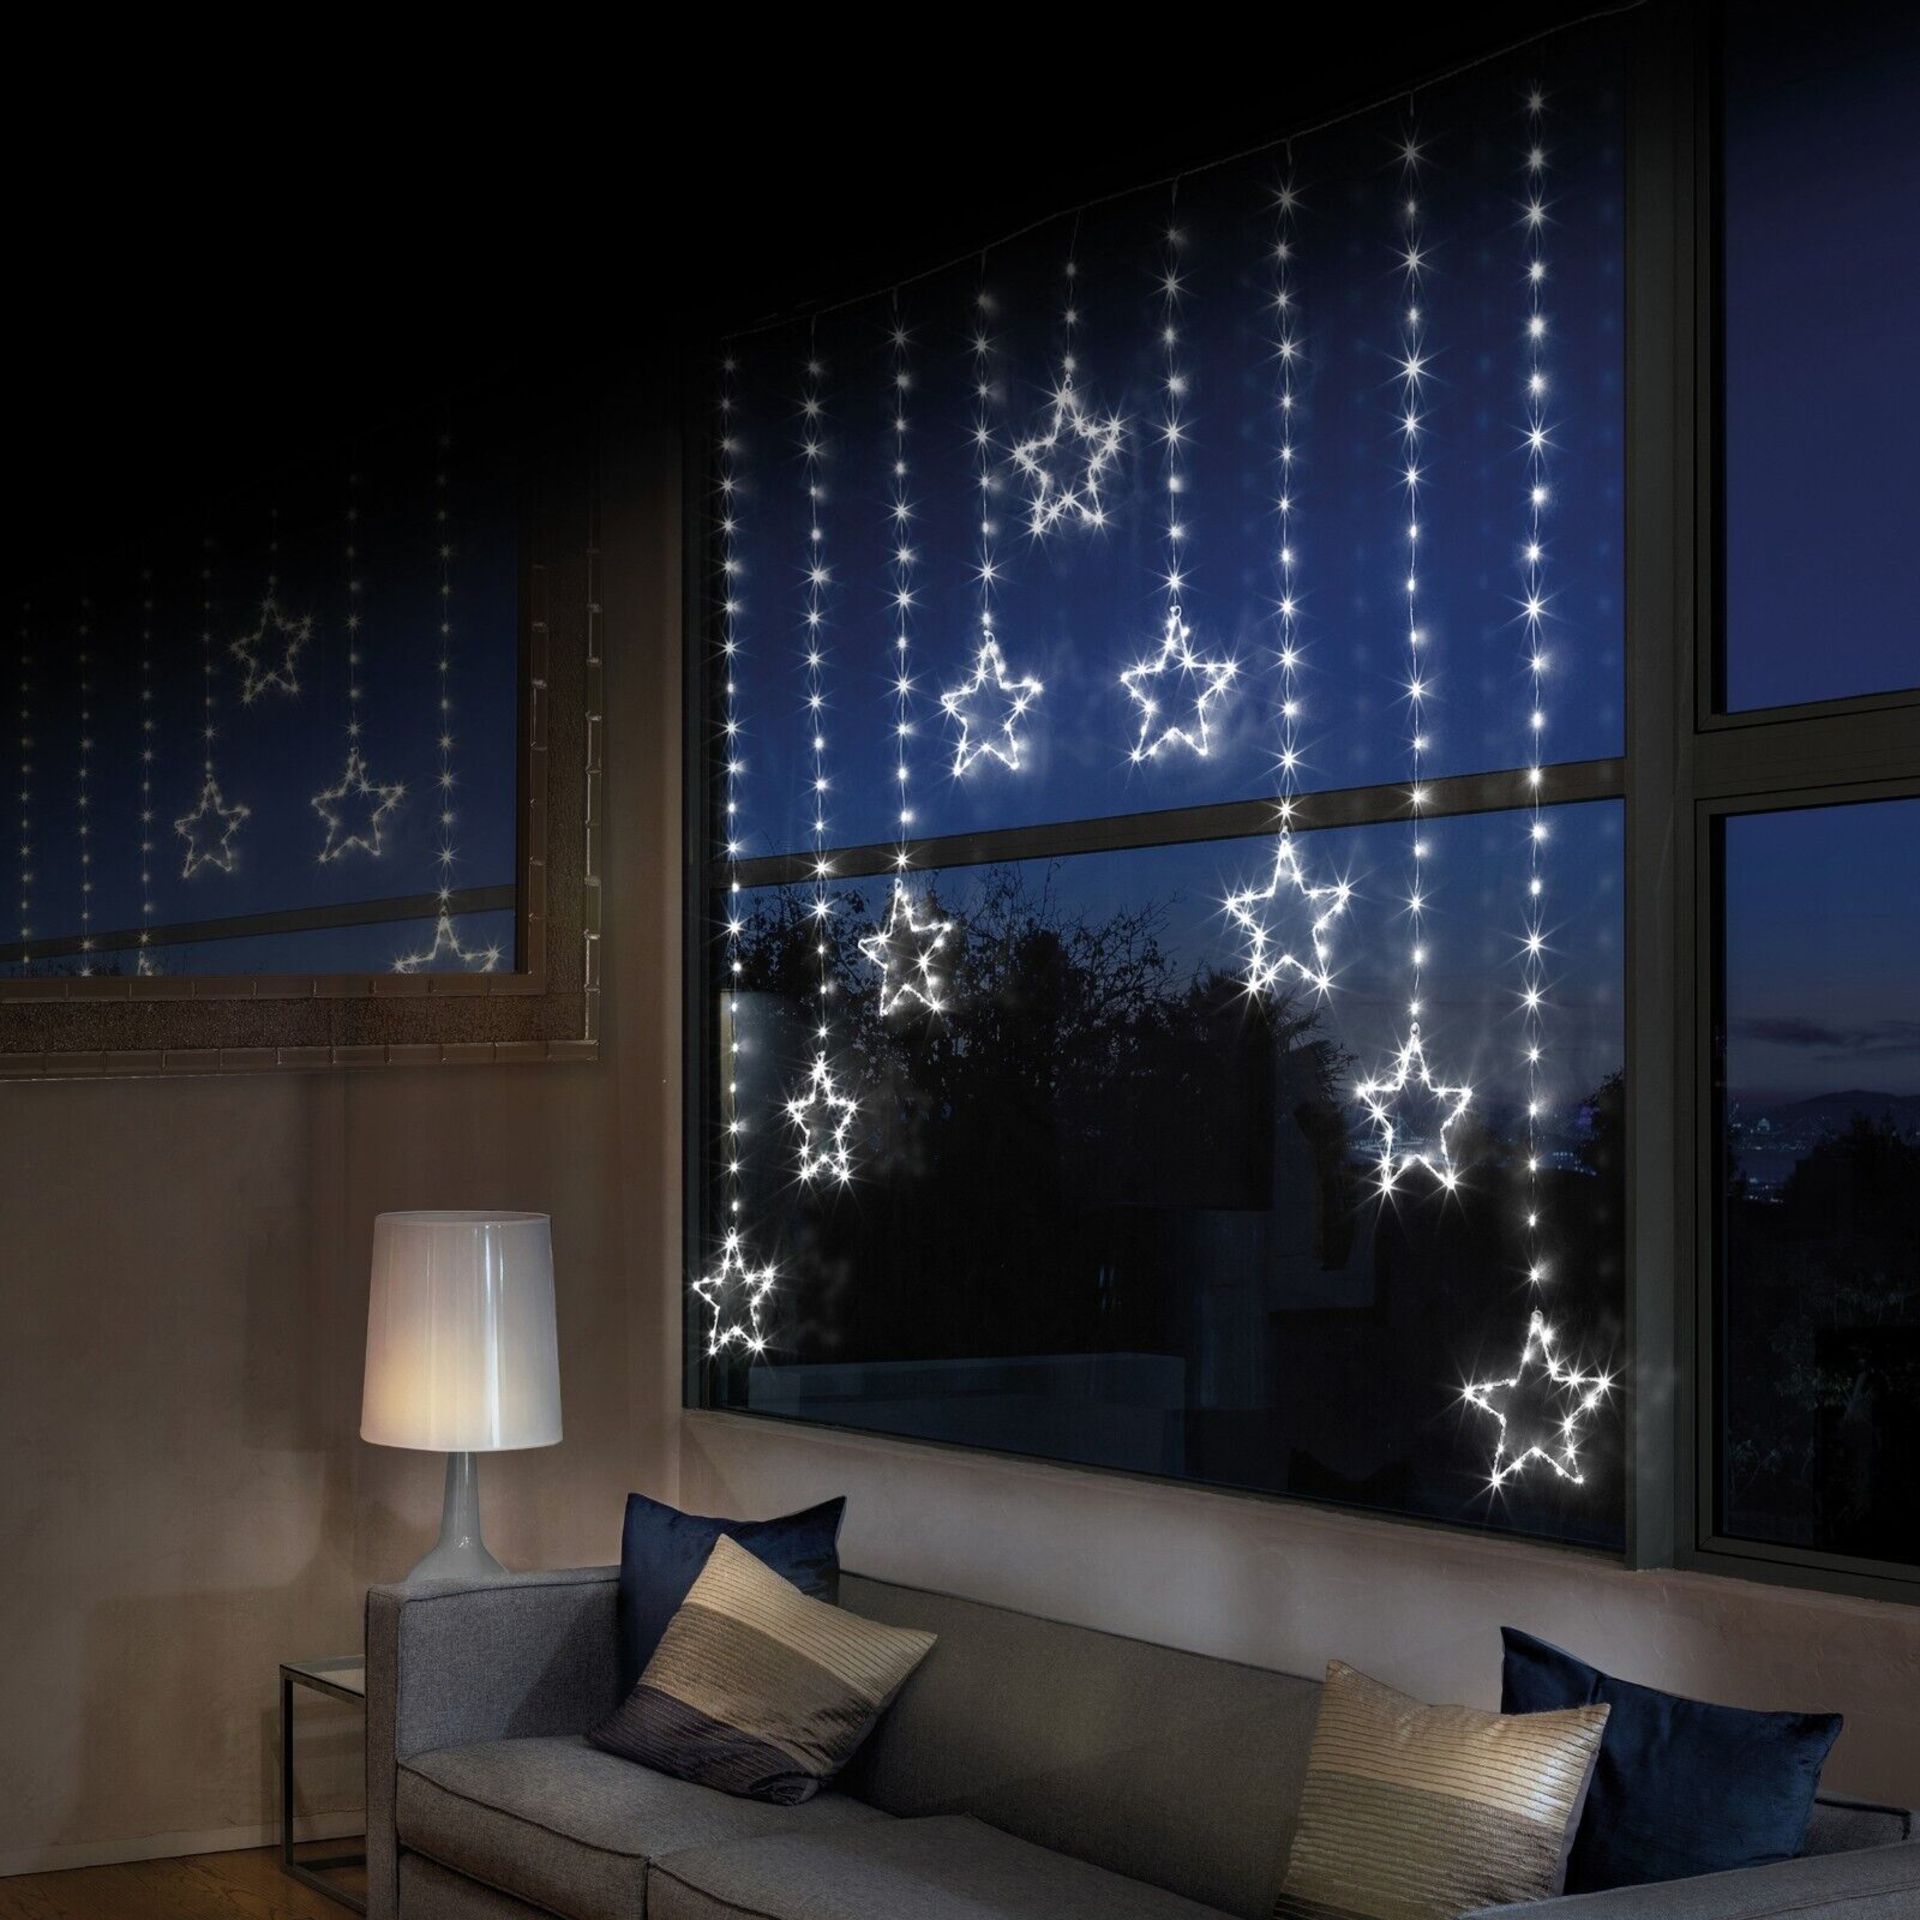 1.2M PREMIER CHRISTMAS STATIC STAR LED SILVER PIN WIRE V CURTAIN LIGHTS IN WHITE - Image 2 of 2